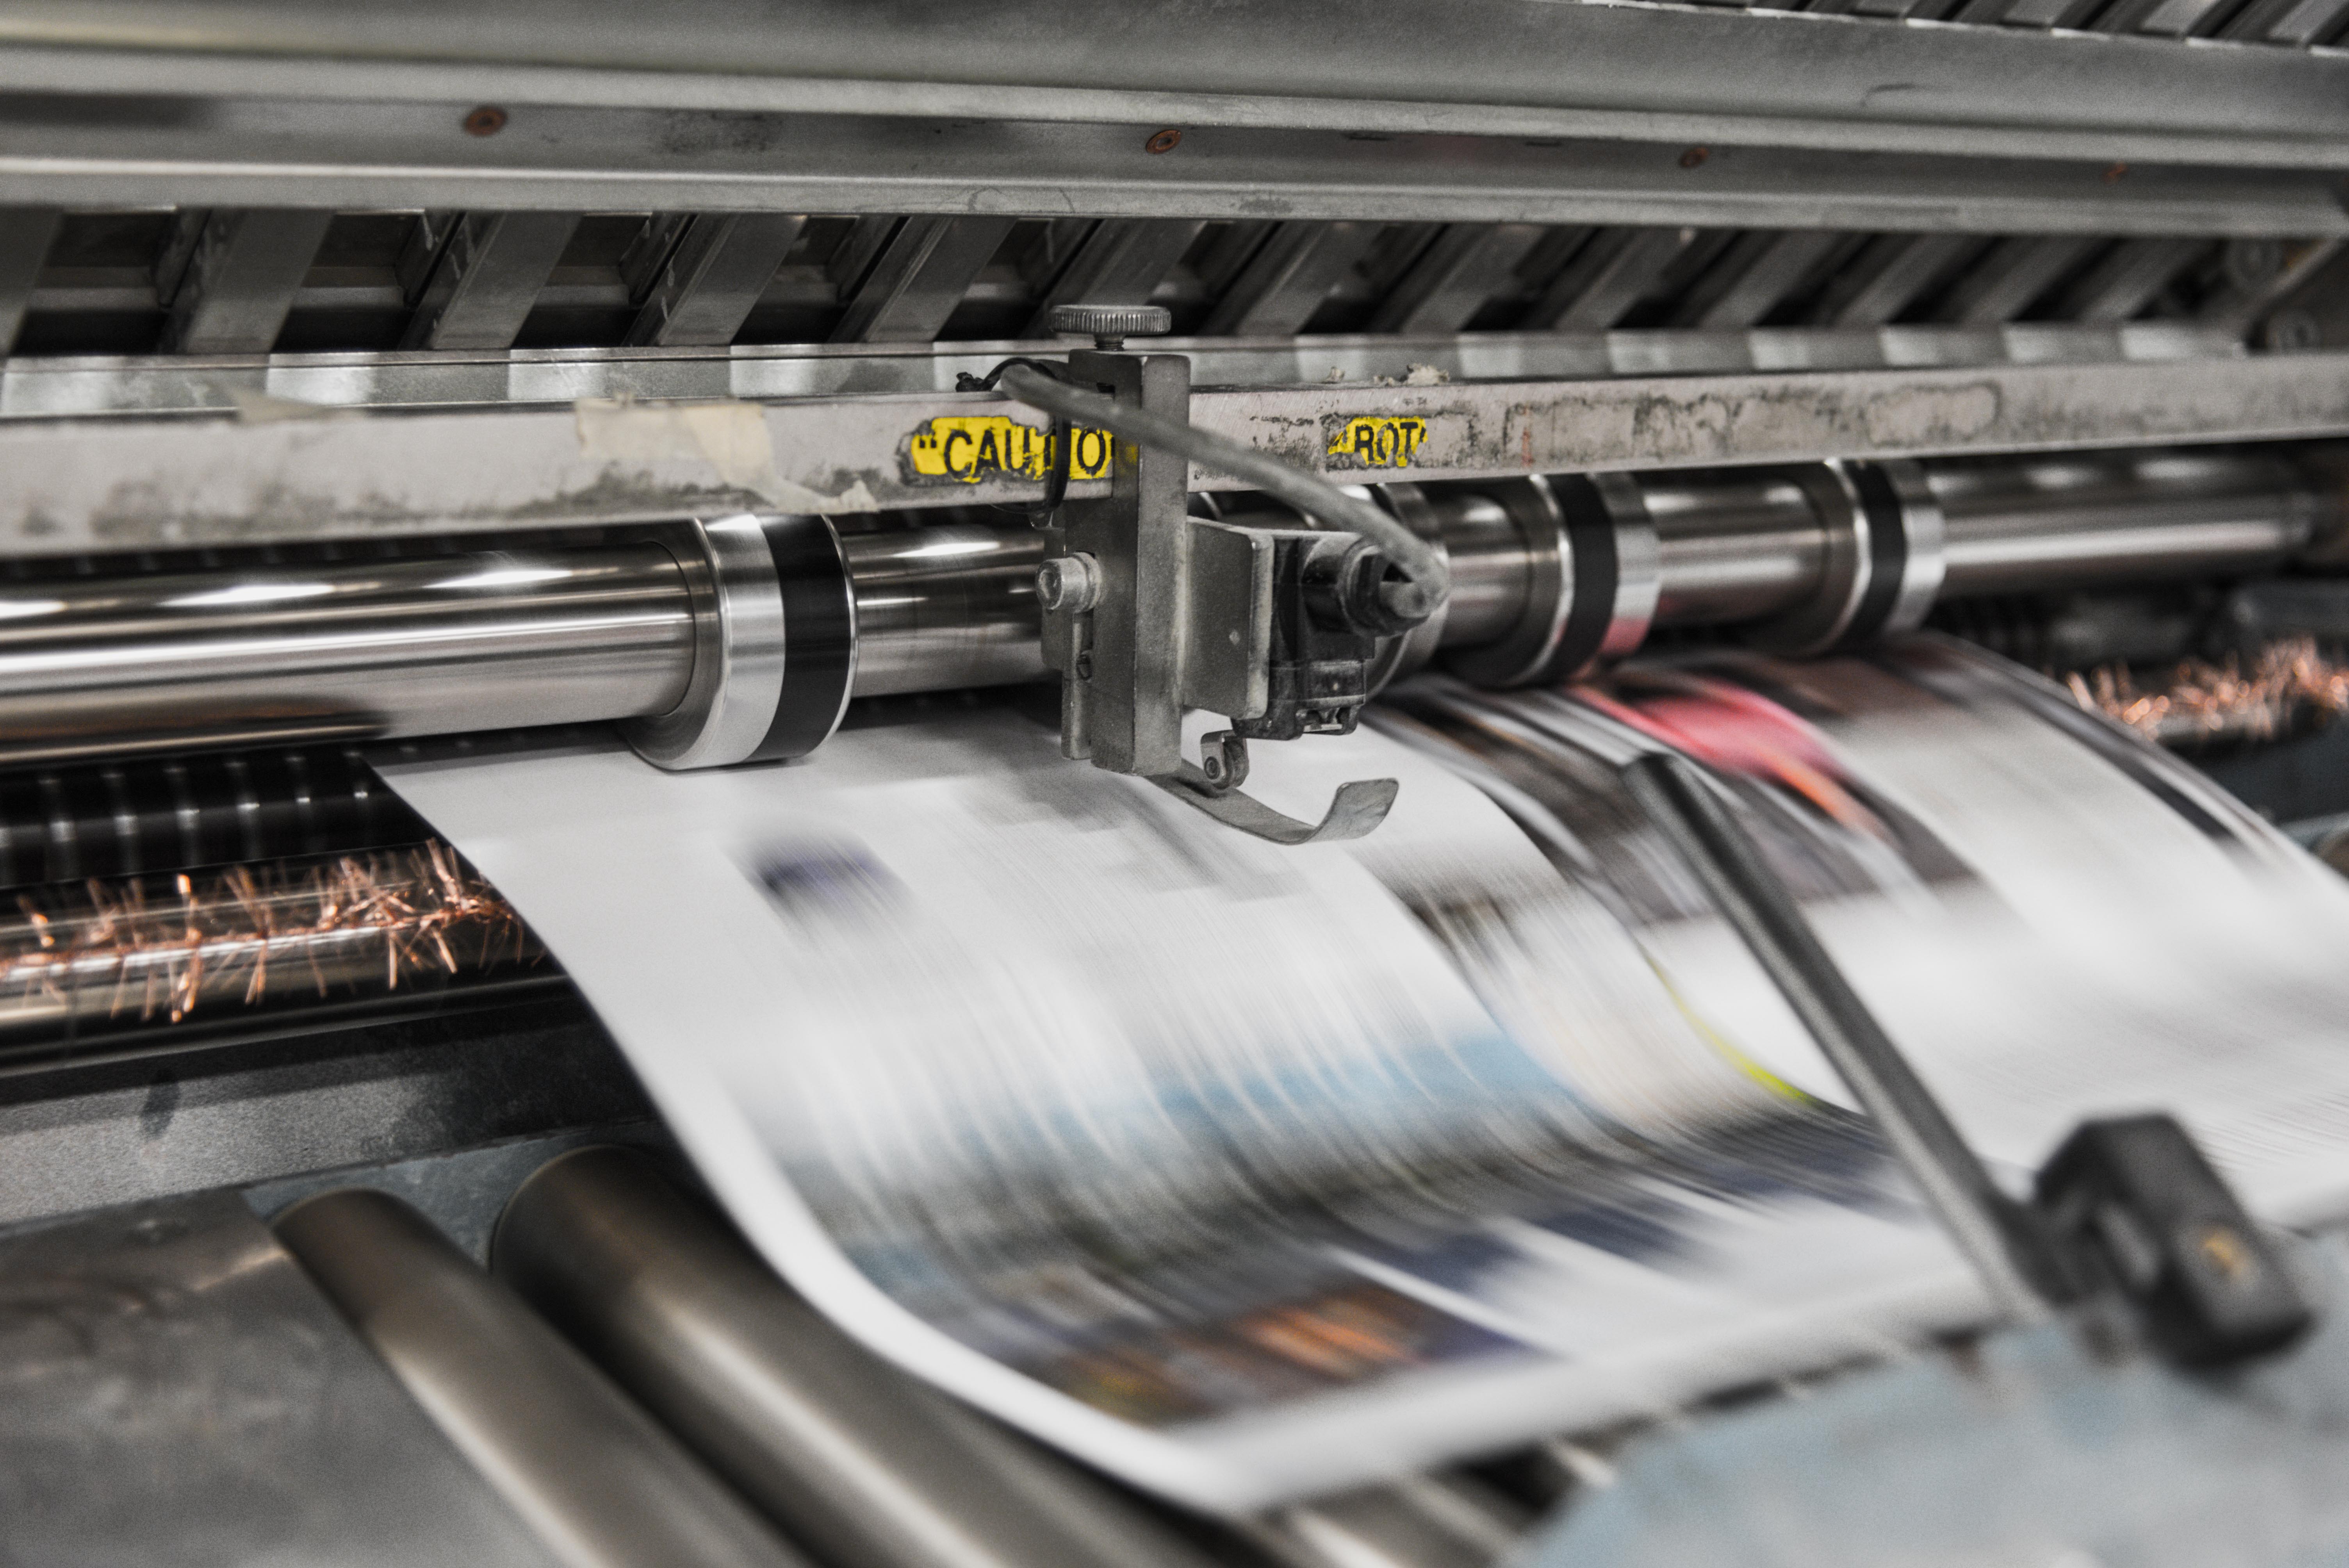 Final printing week for many local and regional newspapers